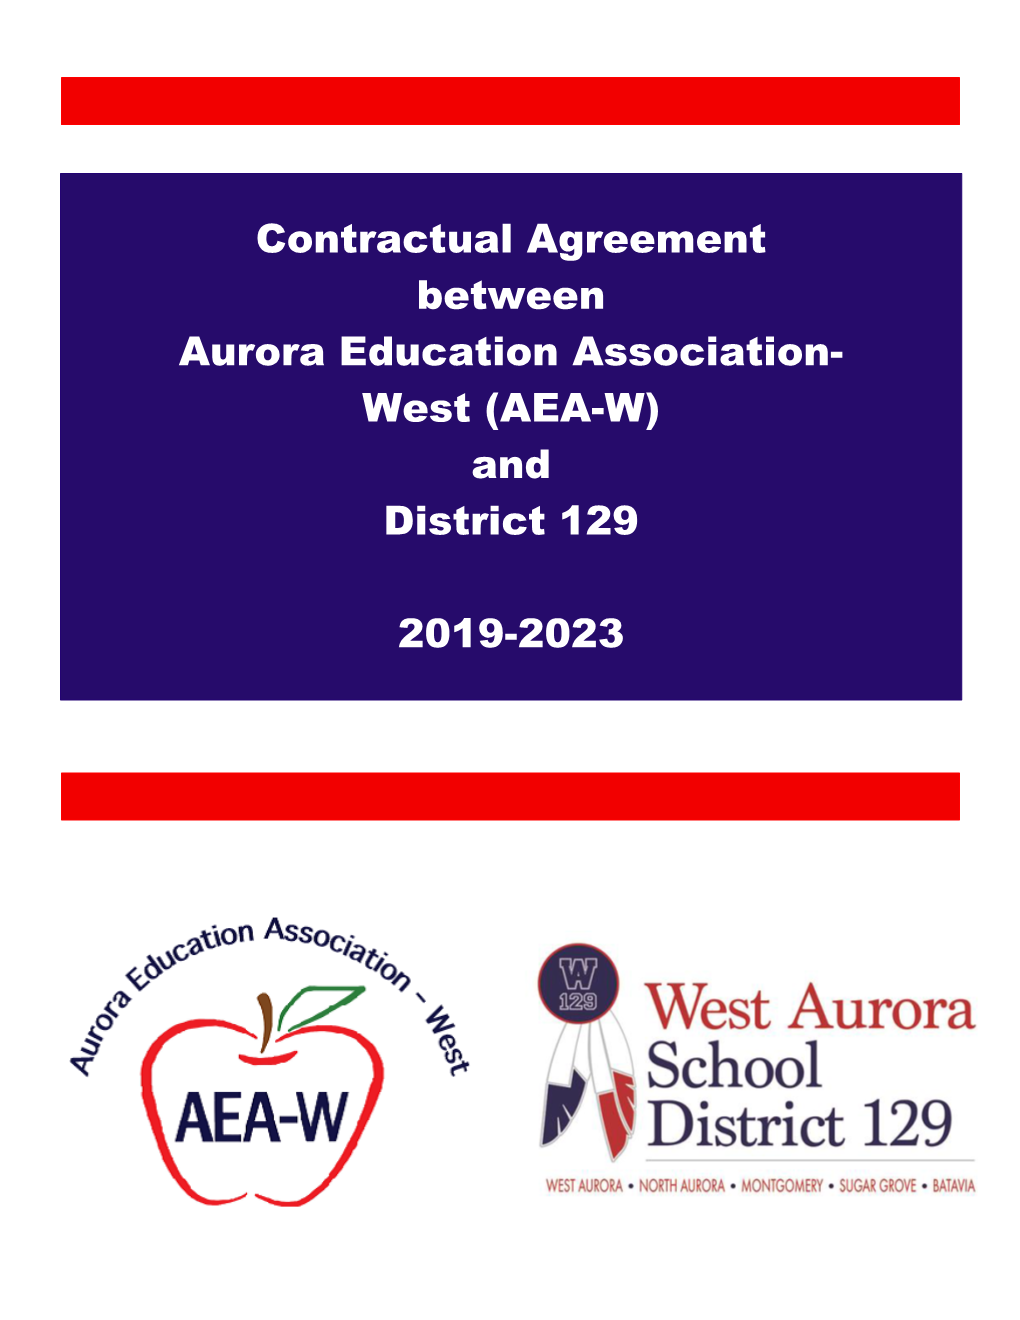 Contractual Agreement Between Aurora Education Association- West (AEA-W) and District 129 2019-2023